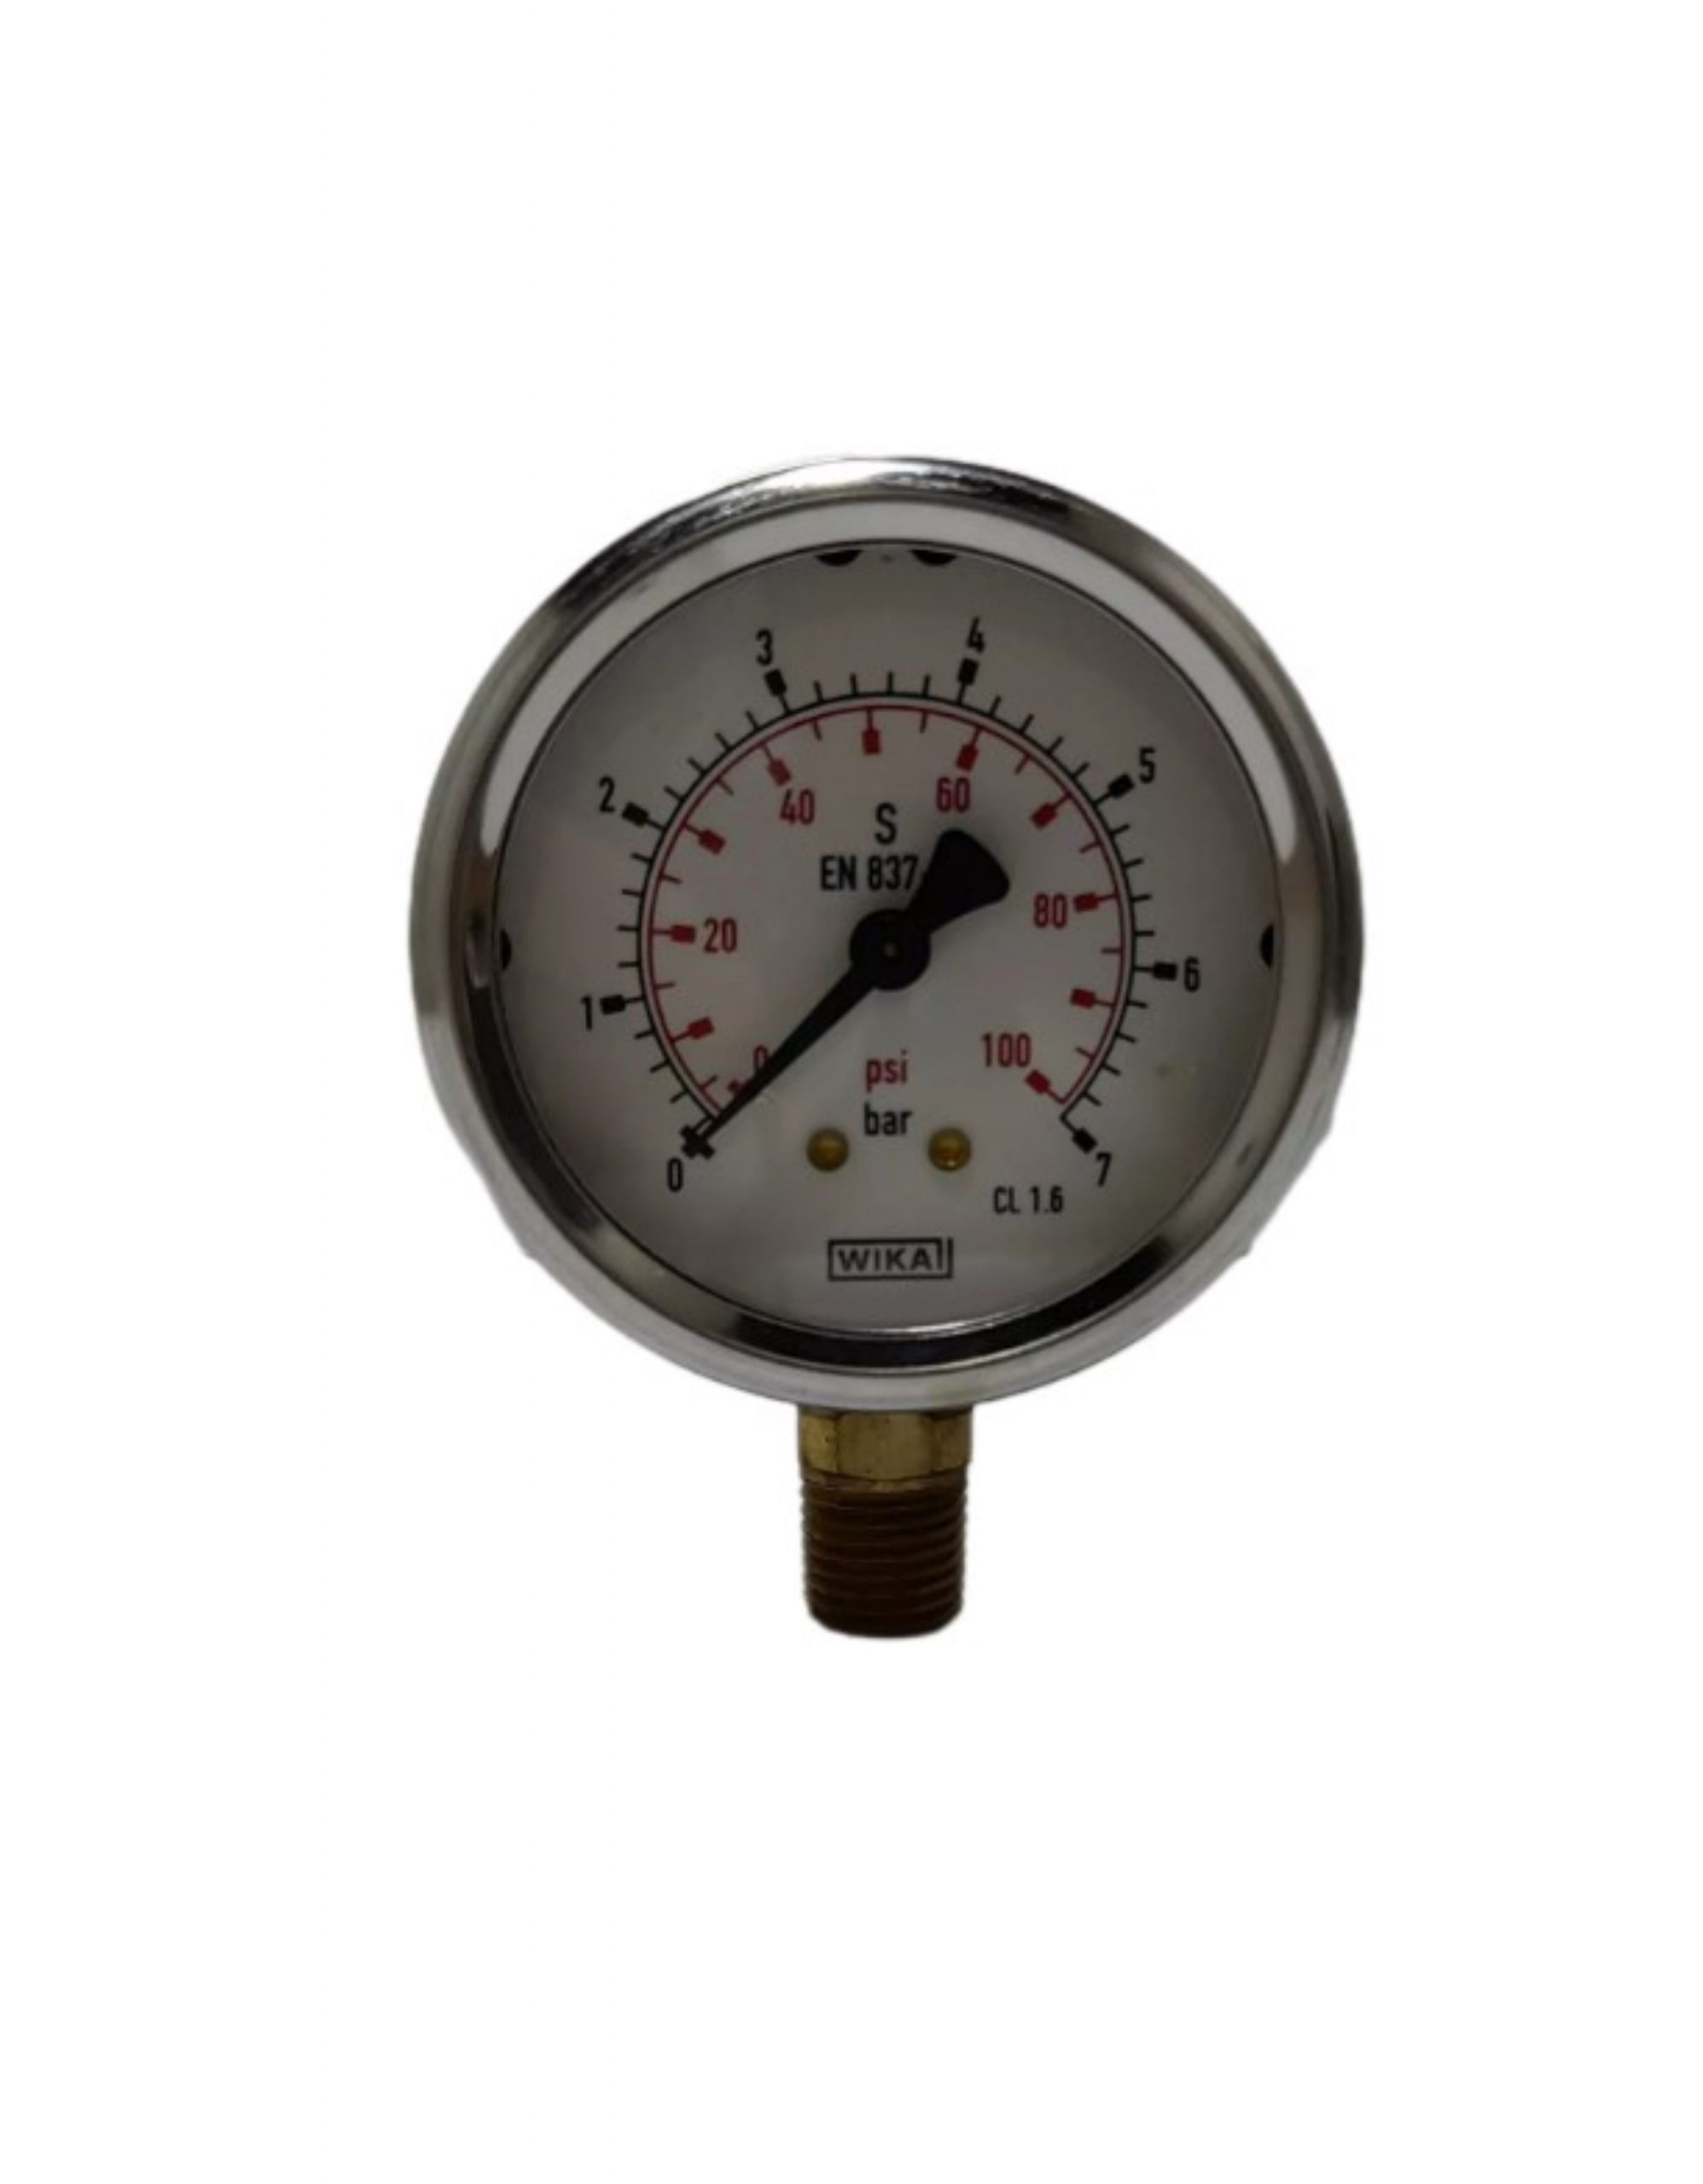 PRESSURE GAUGE 0-7 BAR DIAMETER 2 1/2 Inches CONNECTION 1/4 Inches ,  WIKA from Gas Equipment Company Llc Abu Dhabi, UNITED ARAB EMIRATES